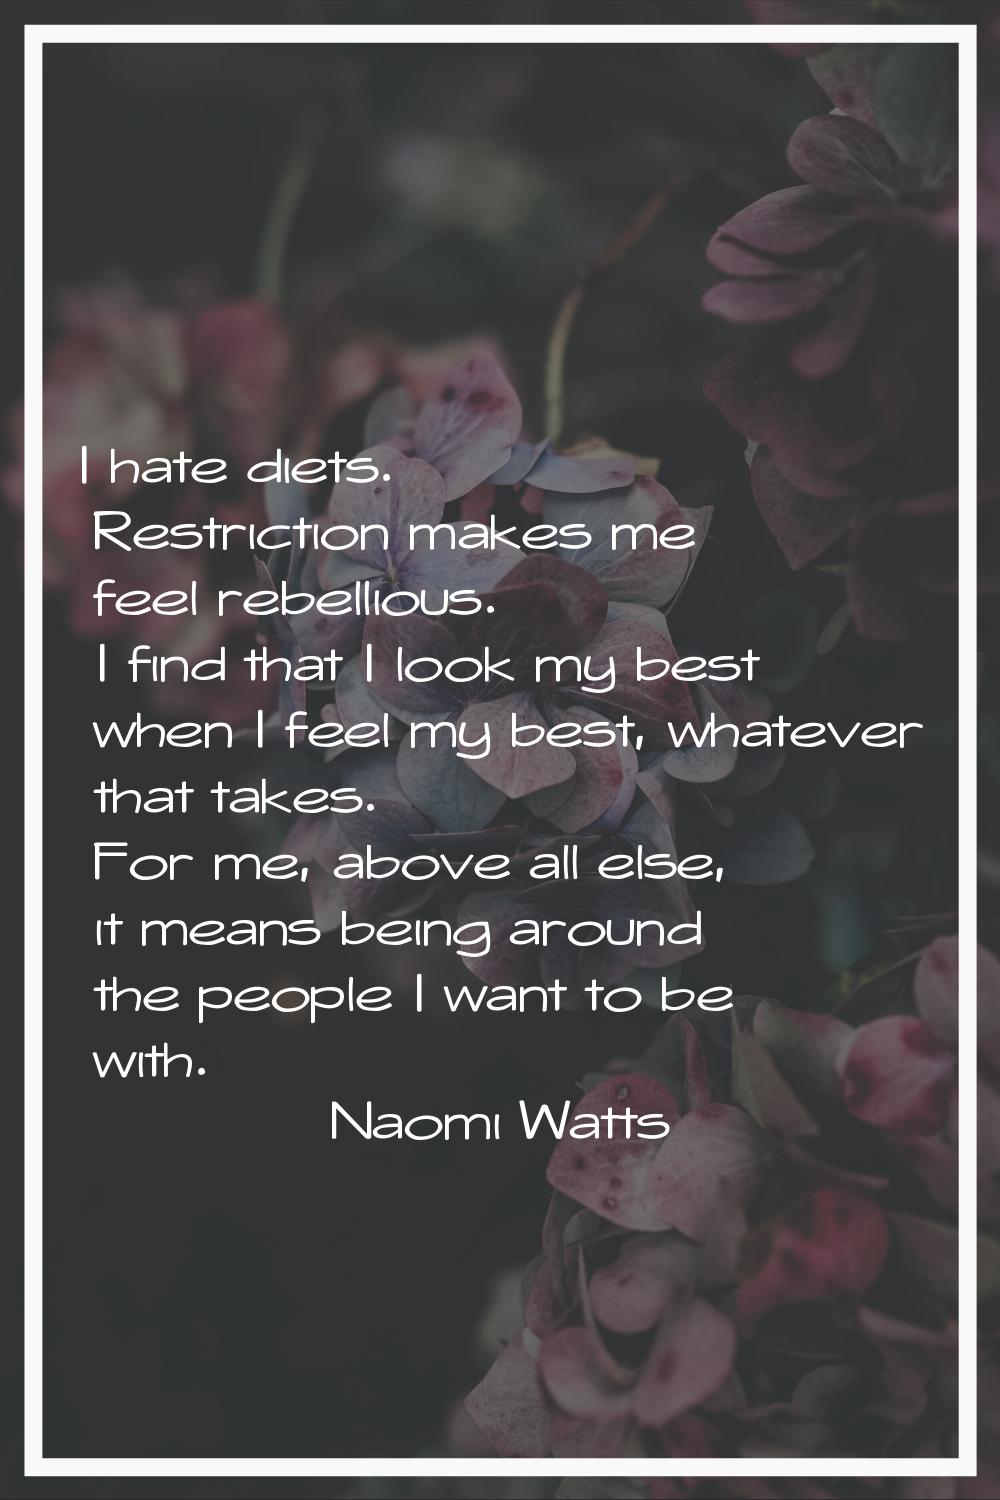 I hate diets. Restriction makes me feel rebellious. I find that I look my best when I feel my best,